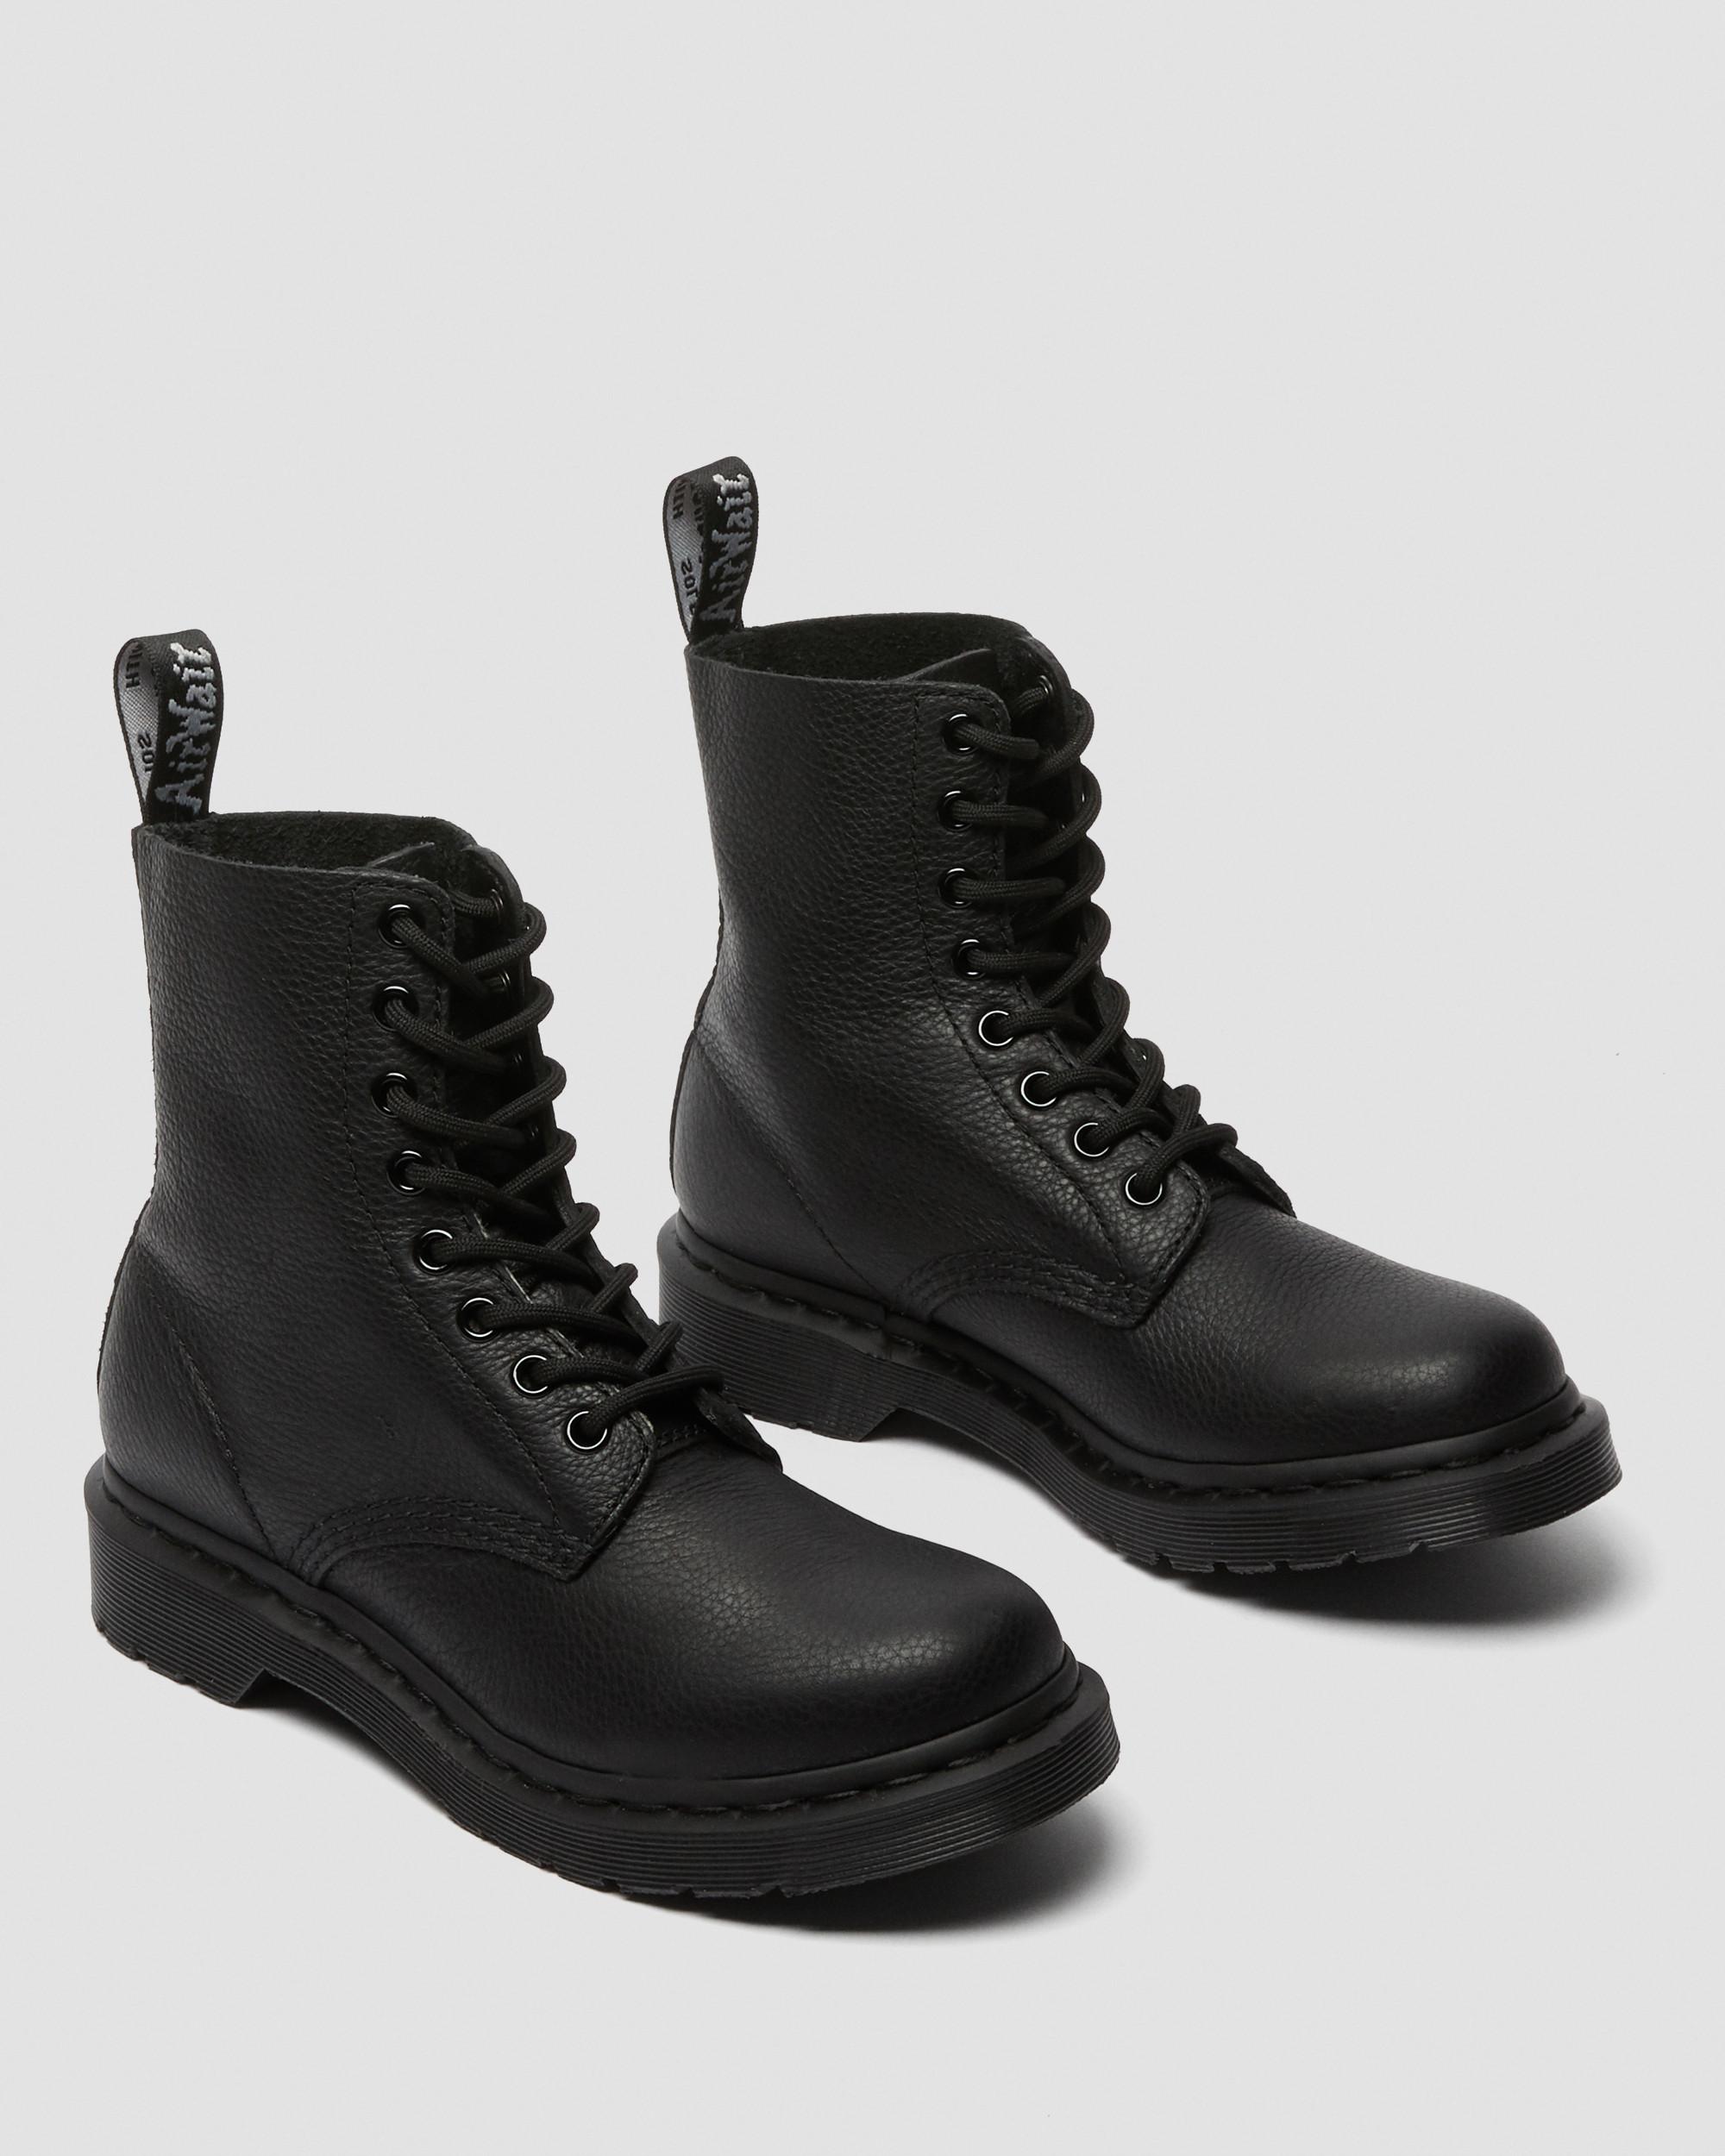 1460 Pascal Women's Mono Lace Up Boots in Black | Dr. Martens